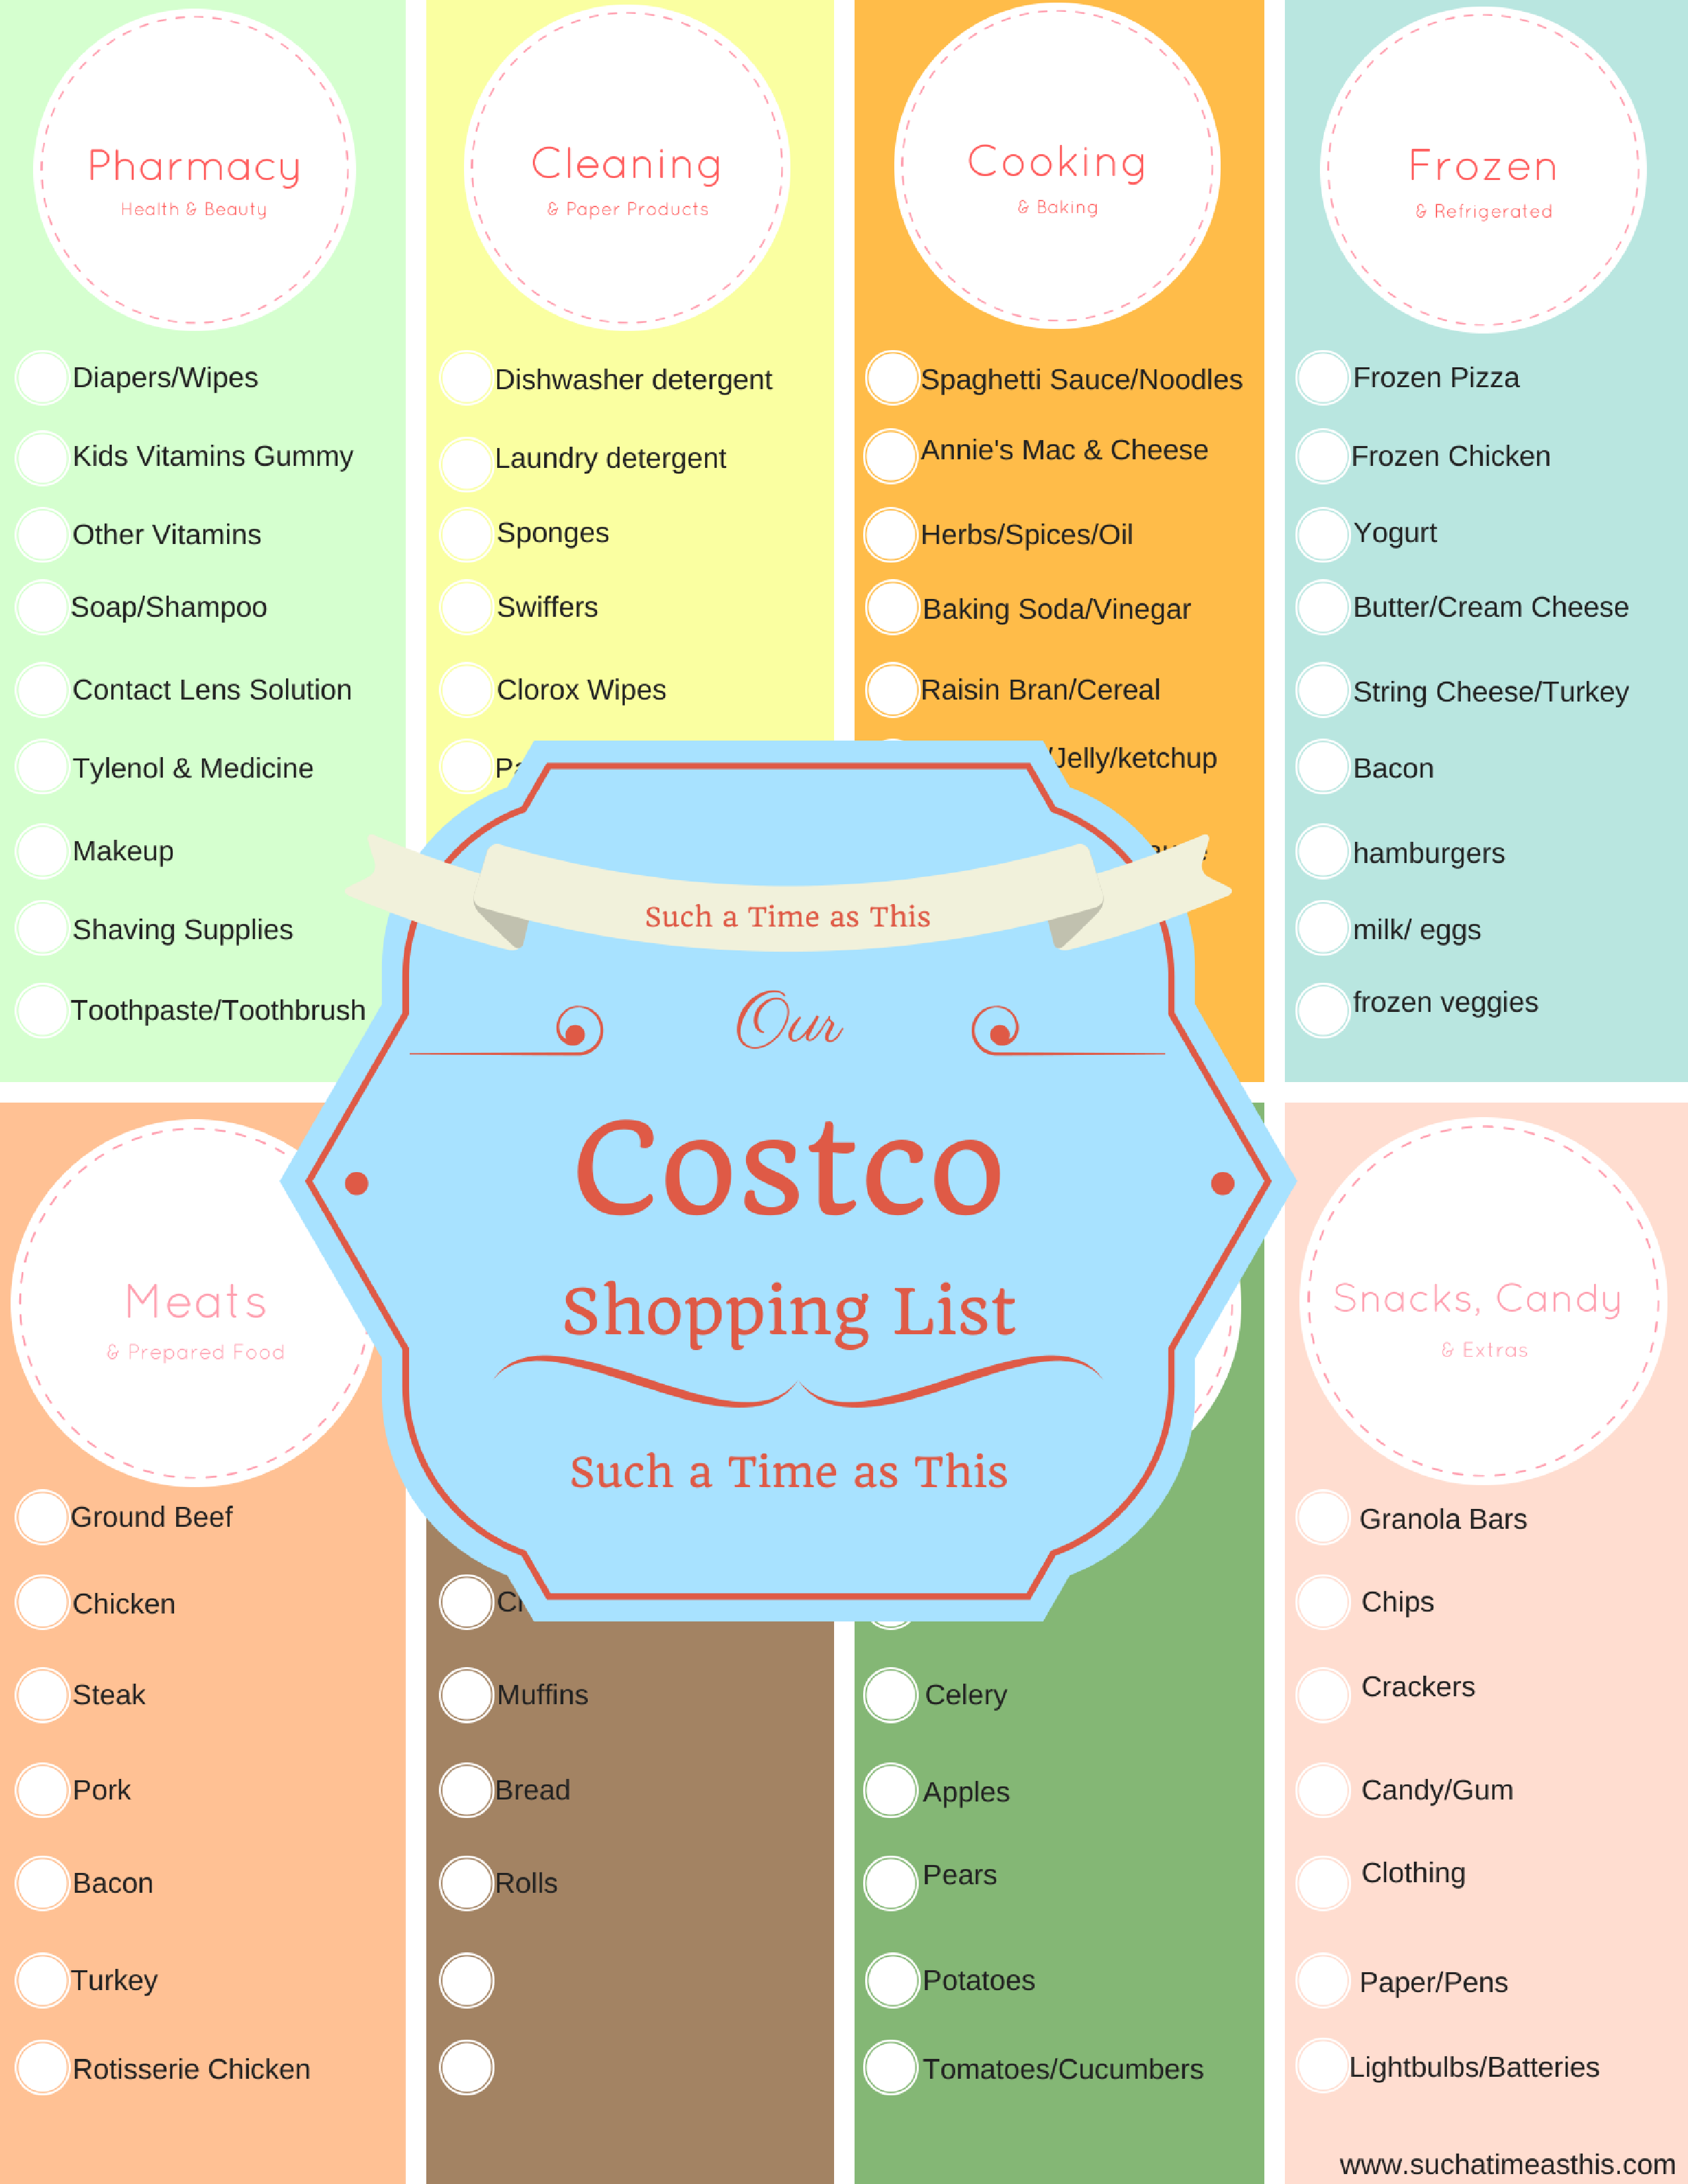 10 Things You Need to Know about Costco  + FREE Printable Costco Shopping List